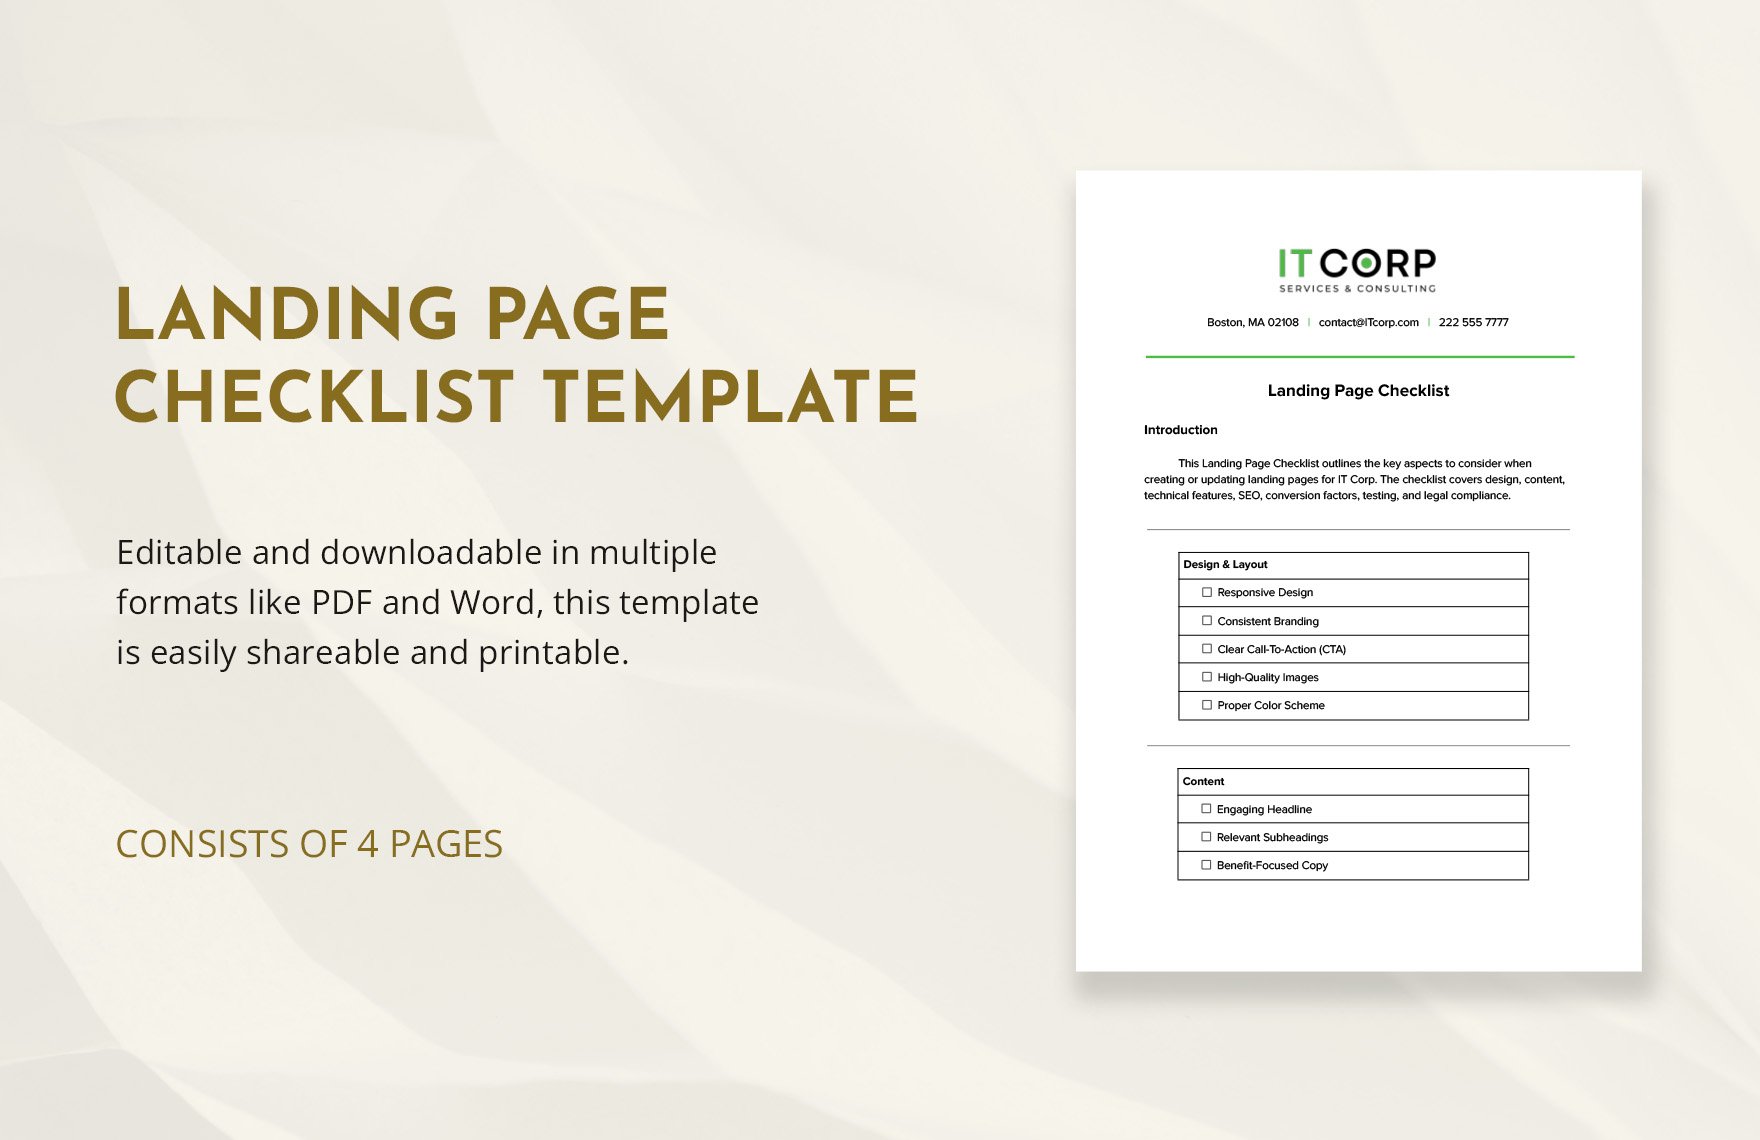 Landing Page Checklist Template